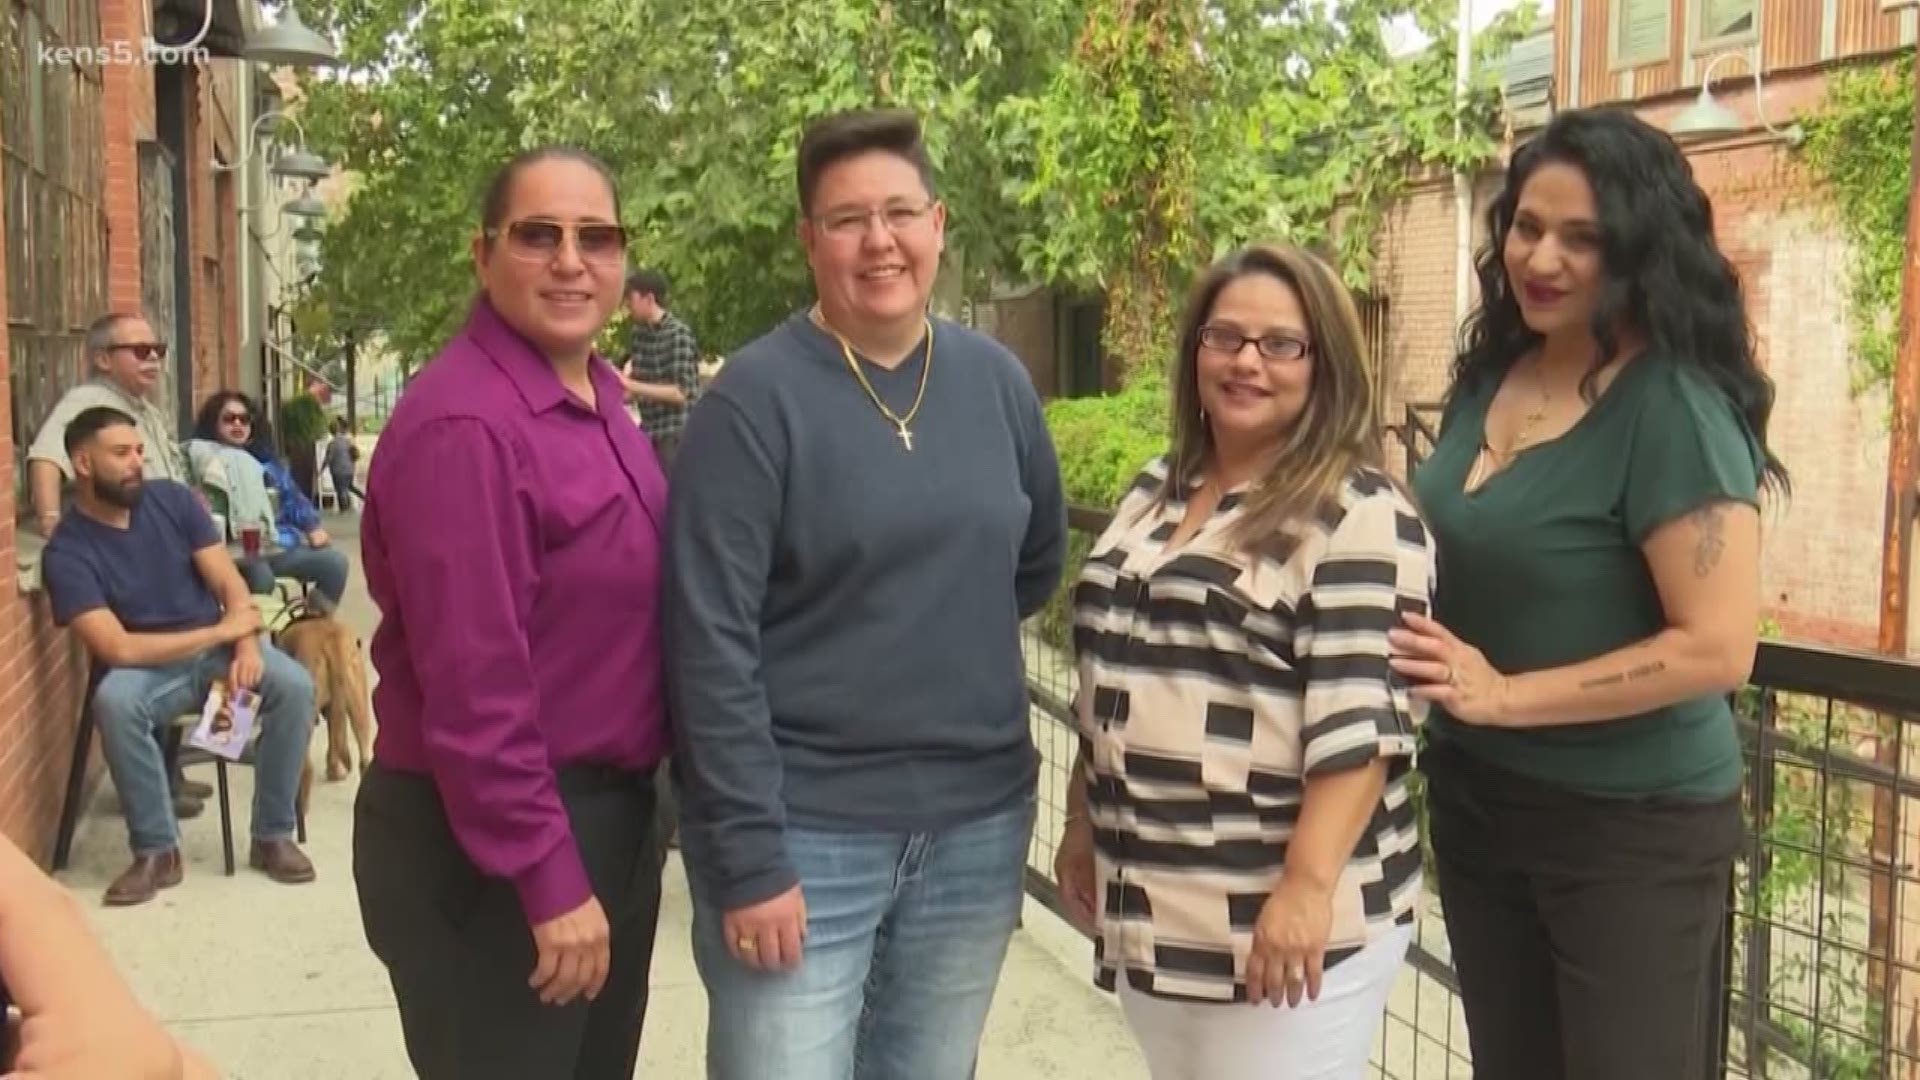 The four friends who were wrongfully convicted of sexually assaulting two young girls are using their story of struggle and survival for a special cause.